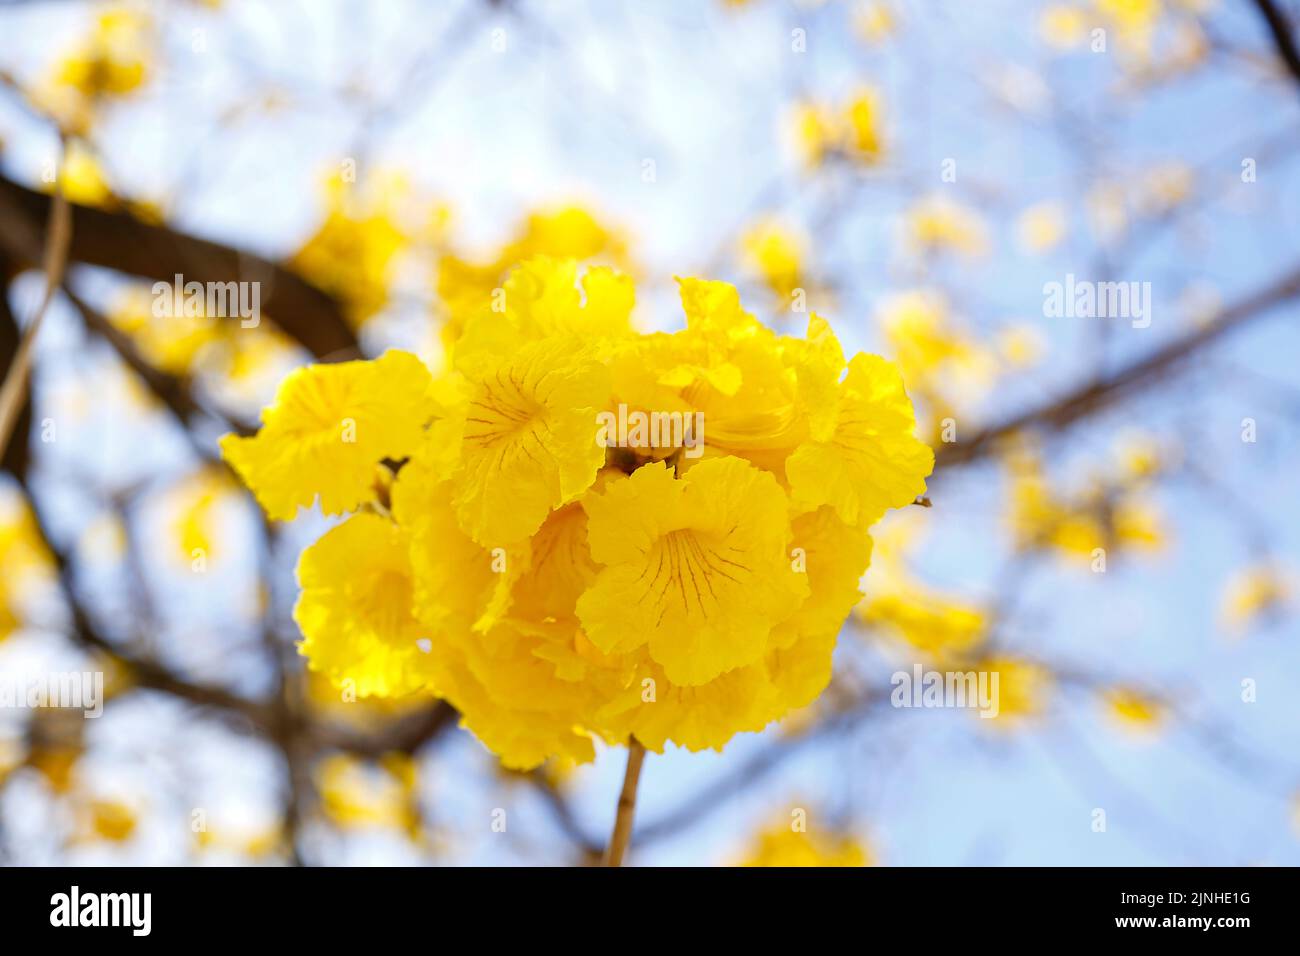 Flower detail on yellow ipe tree in early bloom with bright blue sky in the background Stock Photo